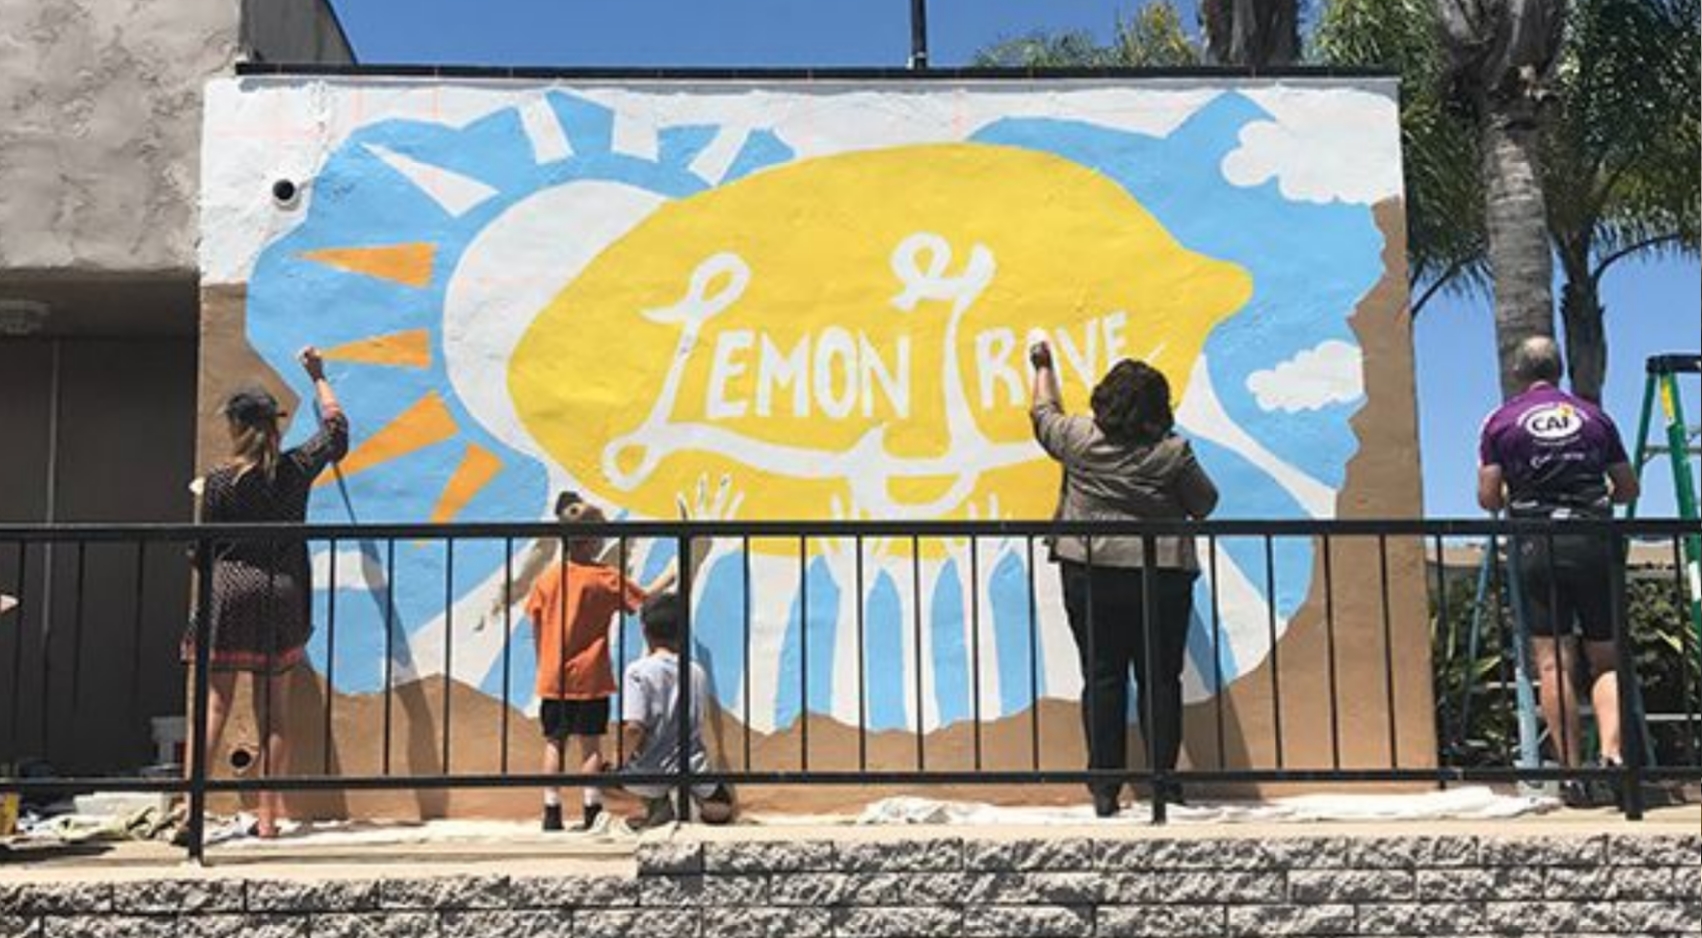 Students in SDSUs Sage Project and Lemon Grove community members painted a mural on the side of the Lemon Grove Recreation Center. (Credit: City of Lemon Grove)